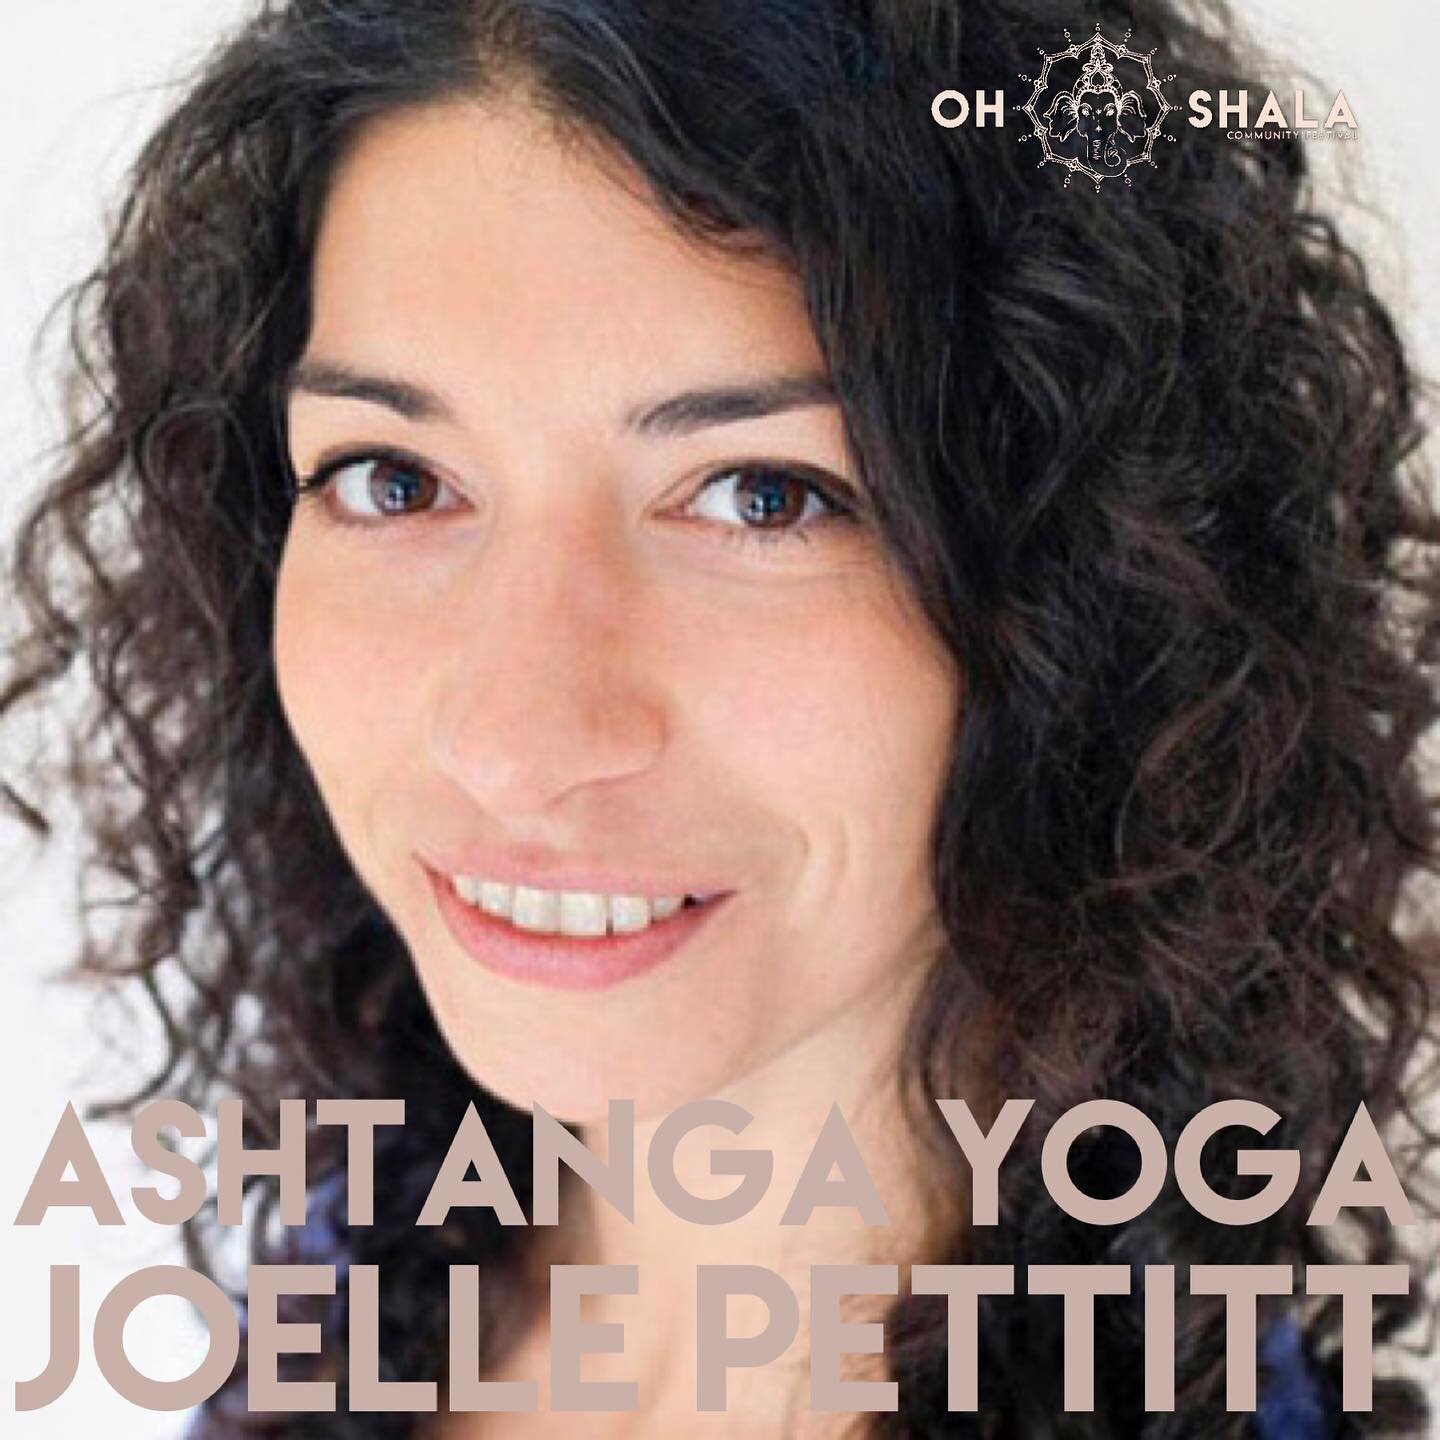 Joelle is an established and reputed Ashtanga Teacher in the Buckinghamshire area and will be teaching our Ashtanga Class.
.
Joelle has always been fascinated by the relationship between mind and body. After graduating from Kings College London with 